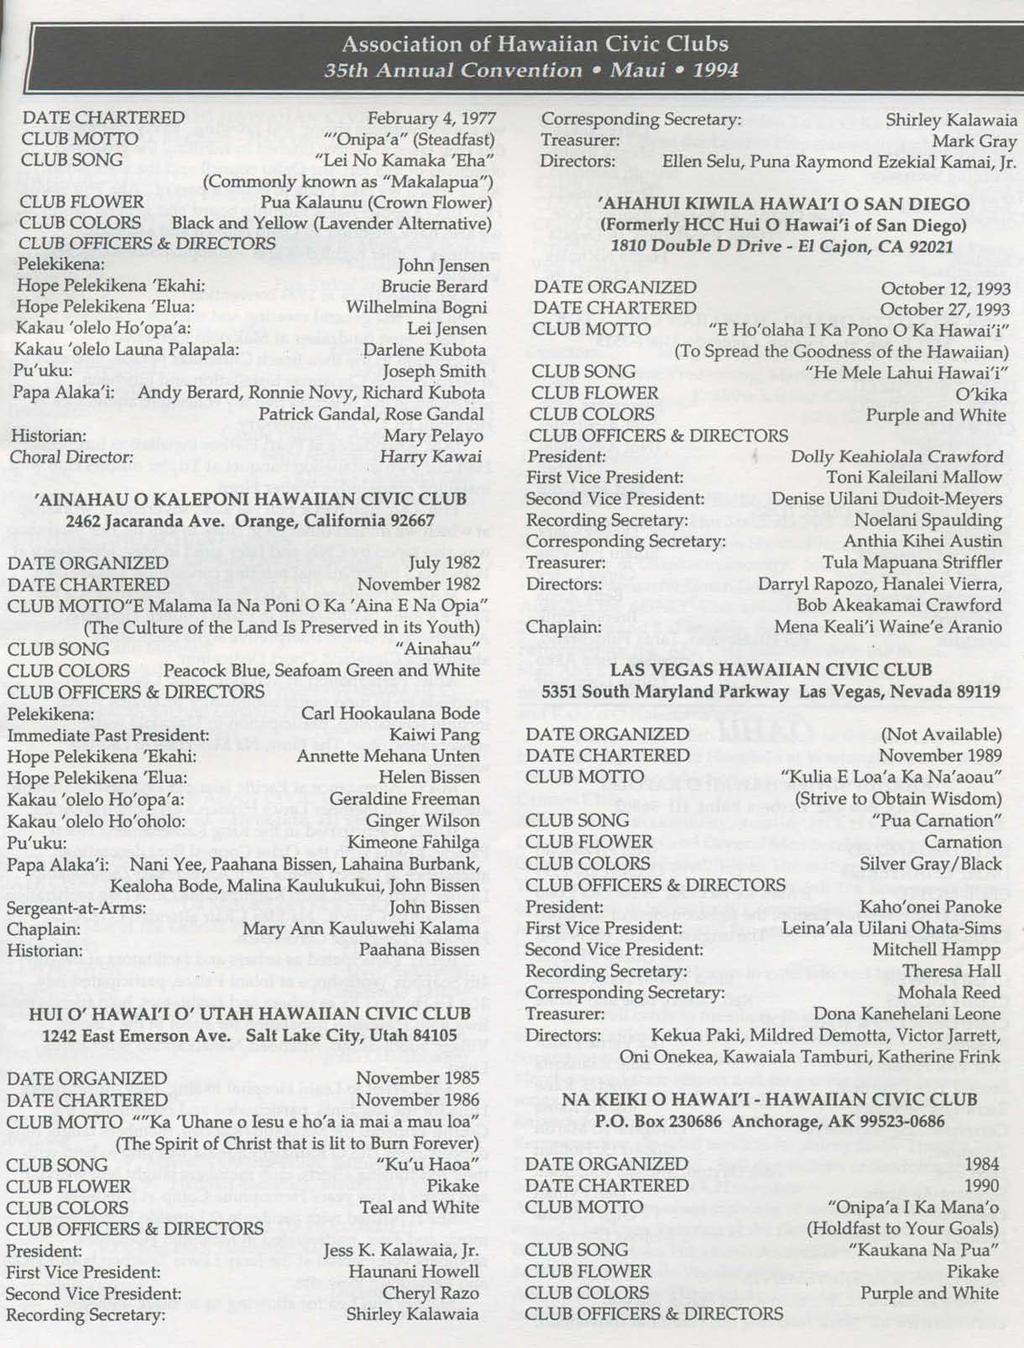 Association of Hawaiian Civic Clubs 35th Annual Convention Maui 1994 DATE CHARTERED CLUBMOlTO CLUBSONG CLUB COLORS CLUB OFFICERS & DIRECTORS Pelekikena: Hope Pelekikena 'Ekahi: Hope Pelekikena 'Elua: